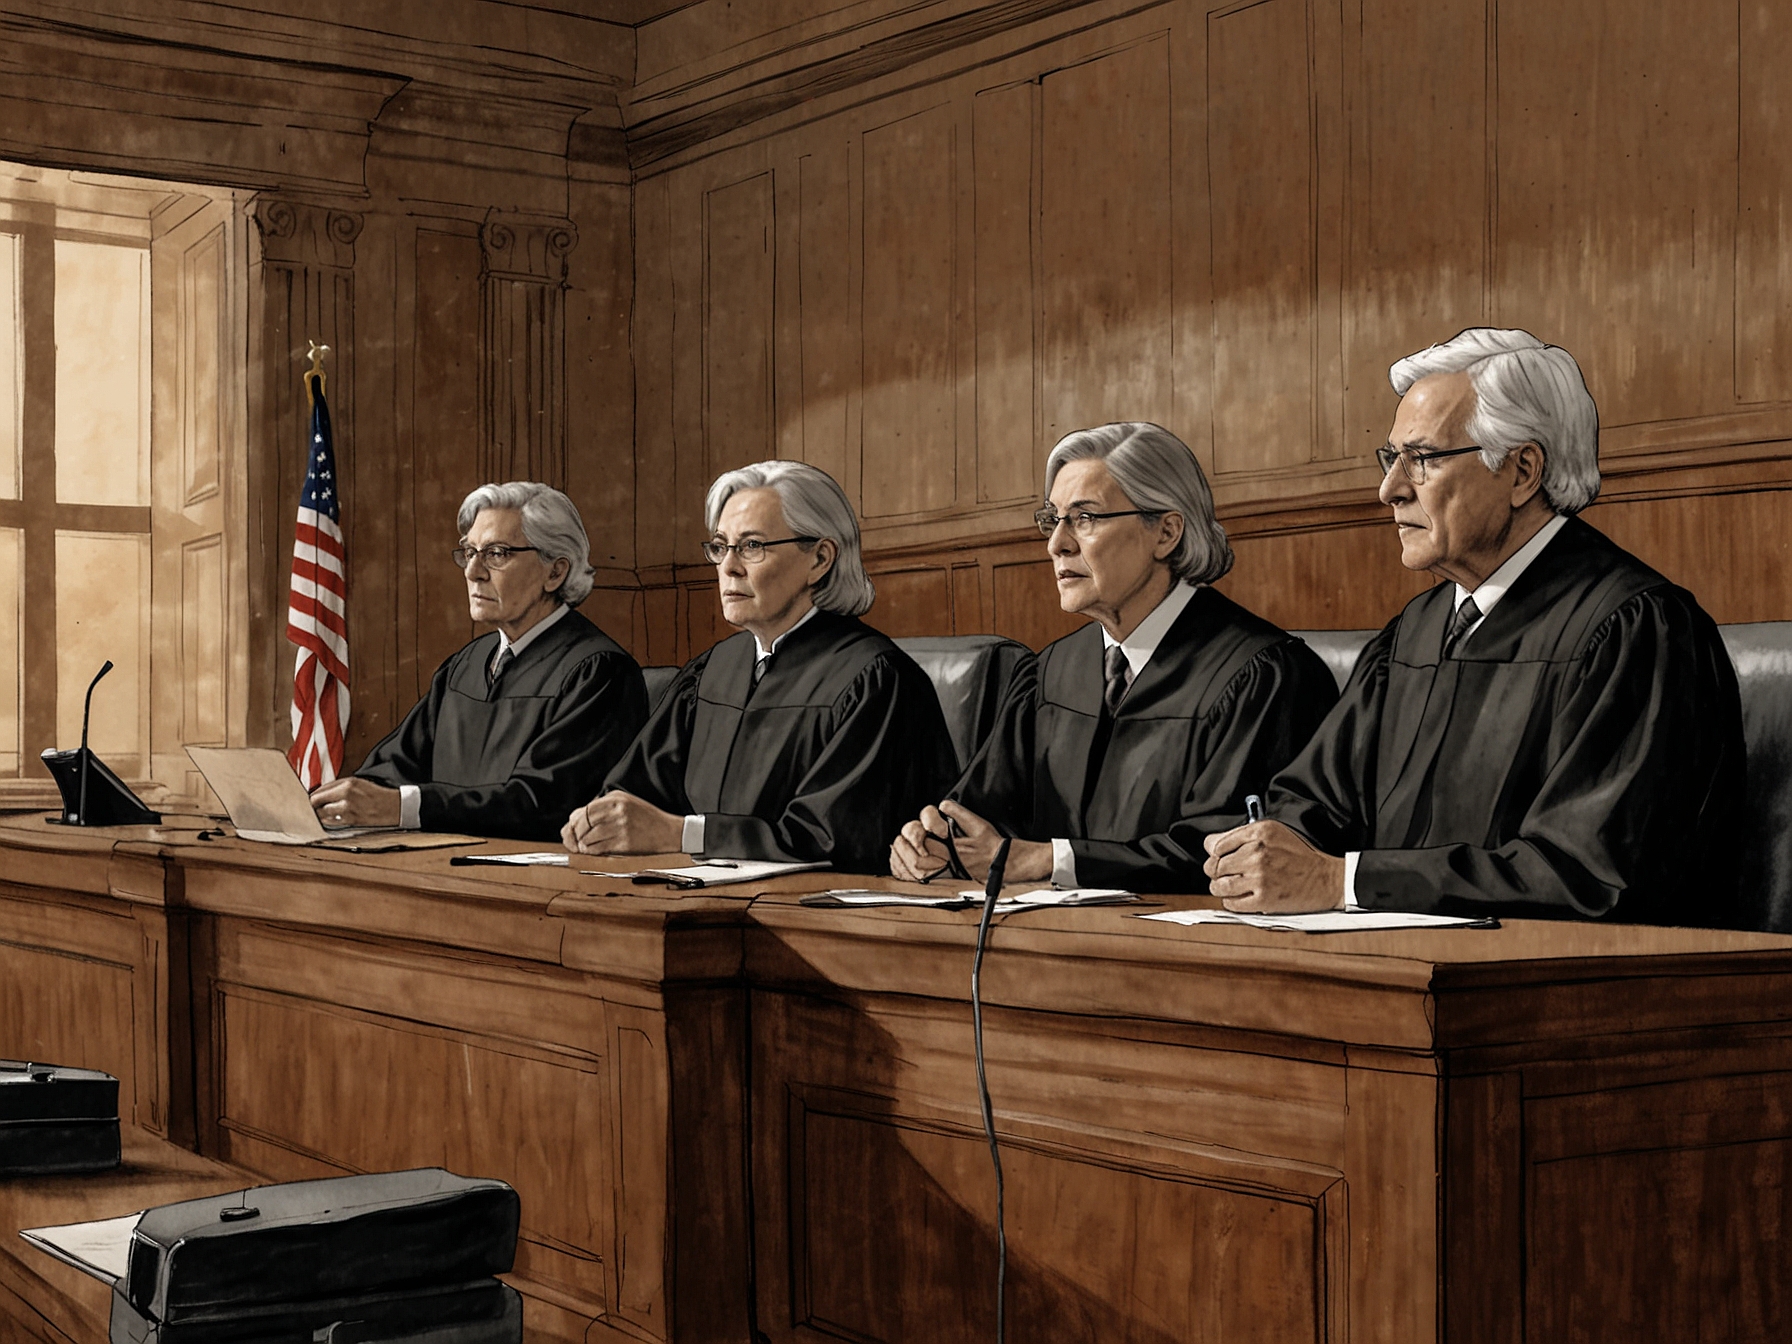 A courtroom illustration depicting Colorado State Supreme Court justices deliberating during oral arguments, highlighting the rigorous examination of legal issues influenced by recent SCOTUS rulings.